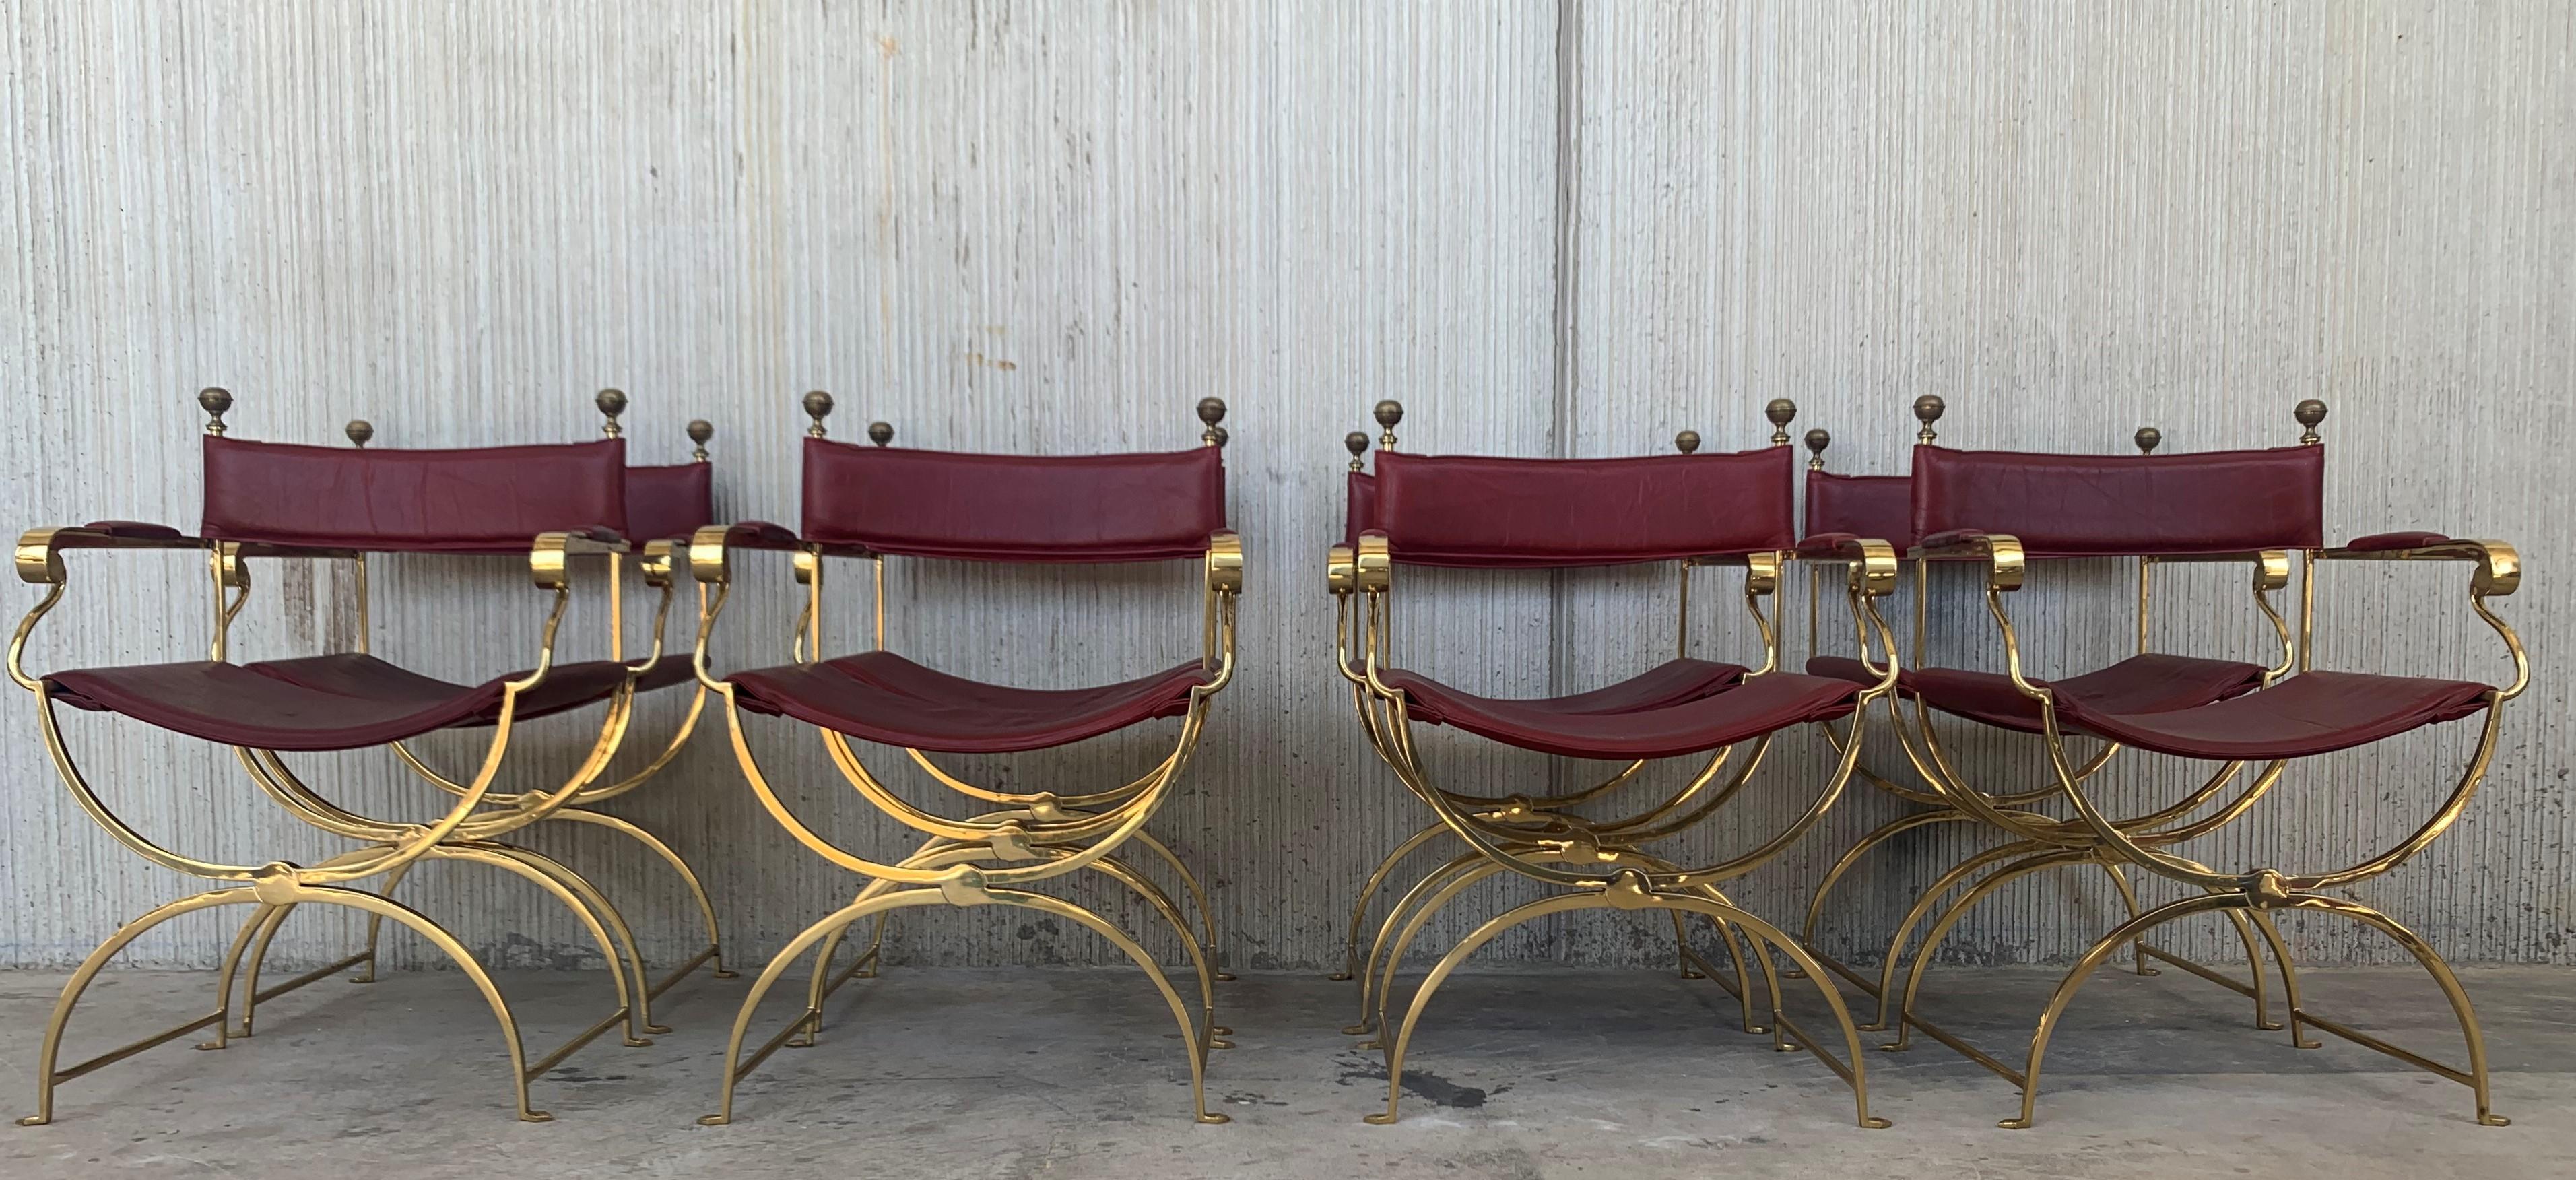 1960s Italian Hollywood Regency Chrome and Leather Savonarola Director's Chairs In Good Condition For Sale In Miami, FL